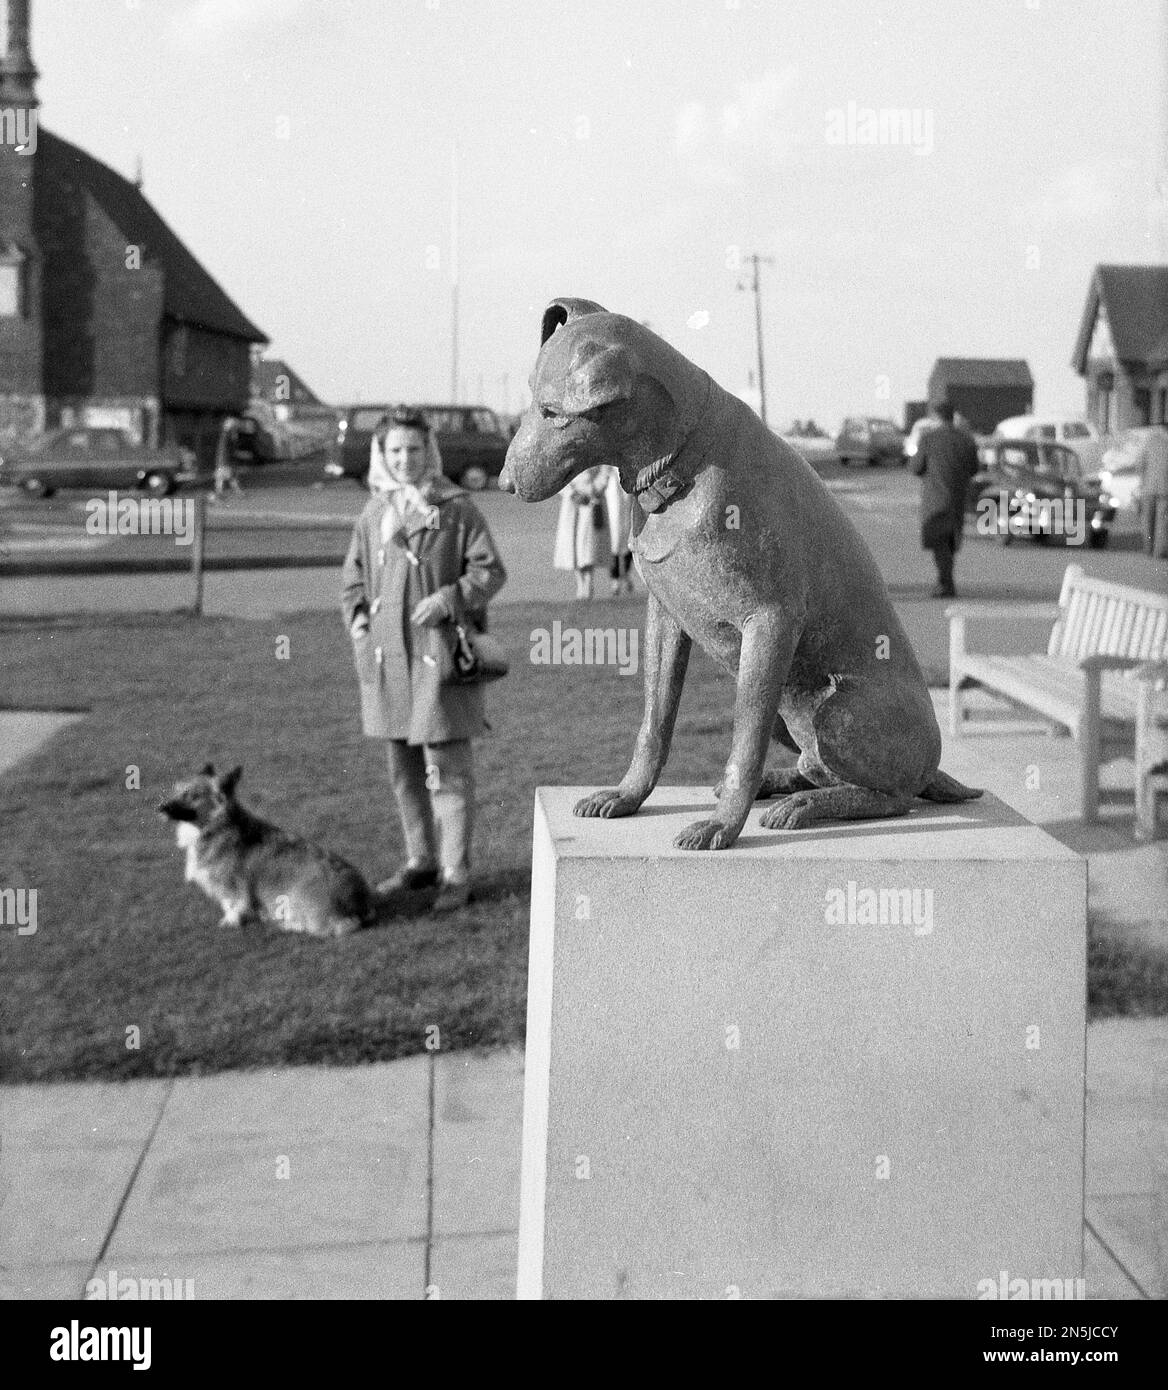 1963, historical, a lady with her small dog beside her, standing, looking at a statue of a dog, 'Snooks' at market square, Aldeburgh, Suffolk, England, UK. The bronze statue was erected in 1961 in memory of local Aldeburgh GP Dr Robin Acheson, as his dog Snooks, who followed the Doctor as he made his calls, he became a familiar sight around the seaside town. Stock Photo